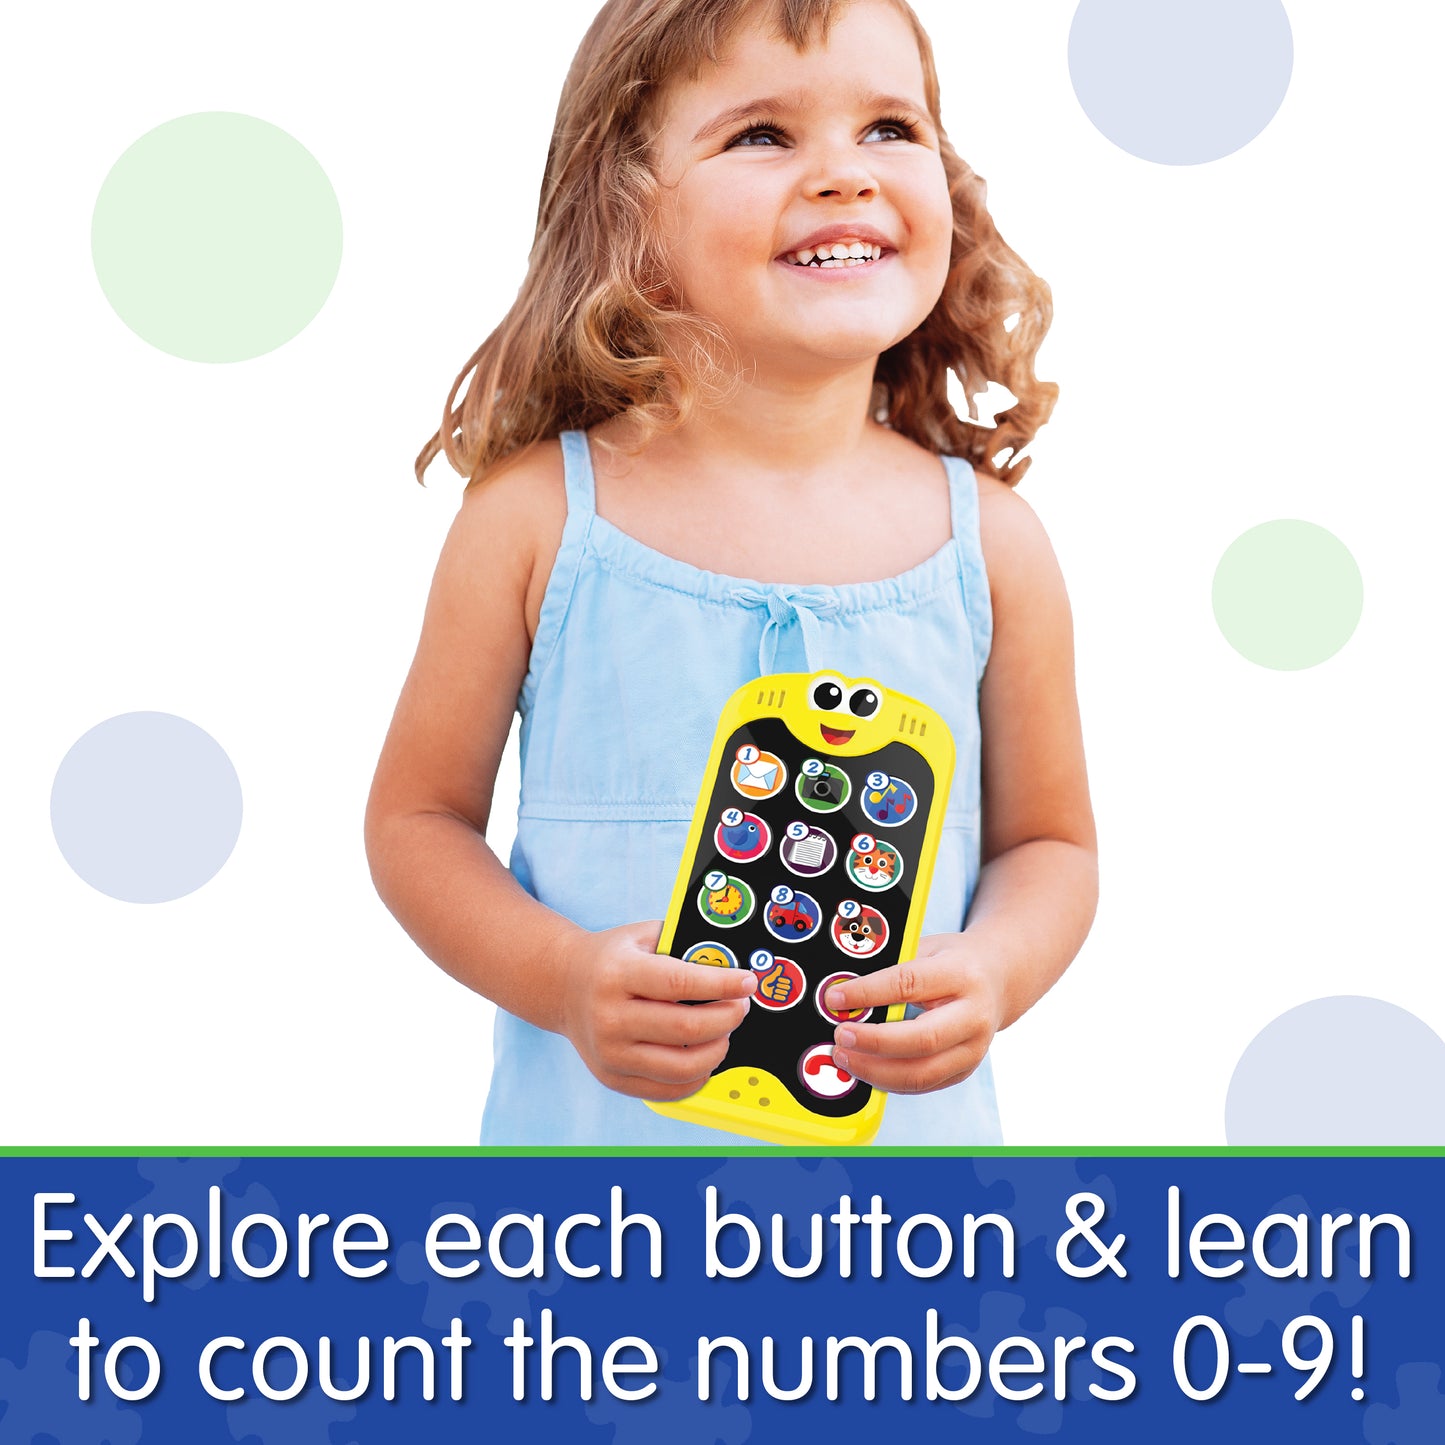 Infographic about On The Go Phone that says, "Explore each button and learn to count the numbers 0 through 9!"